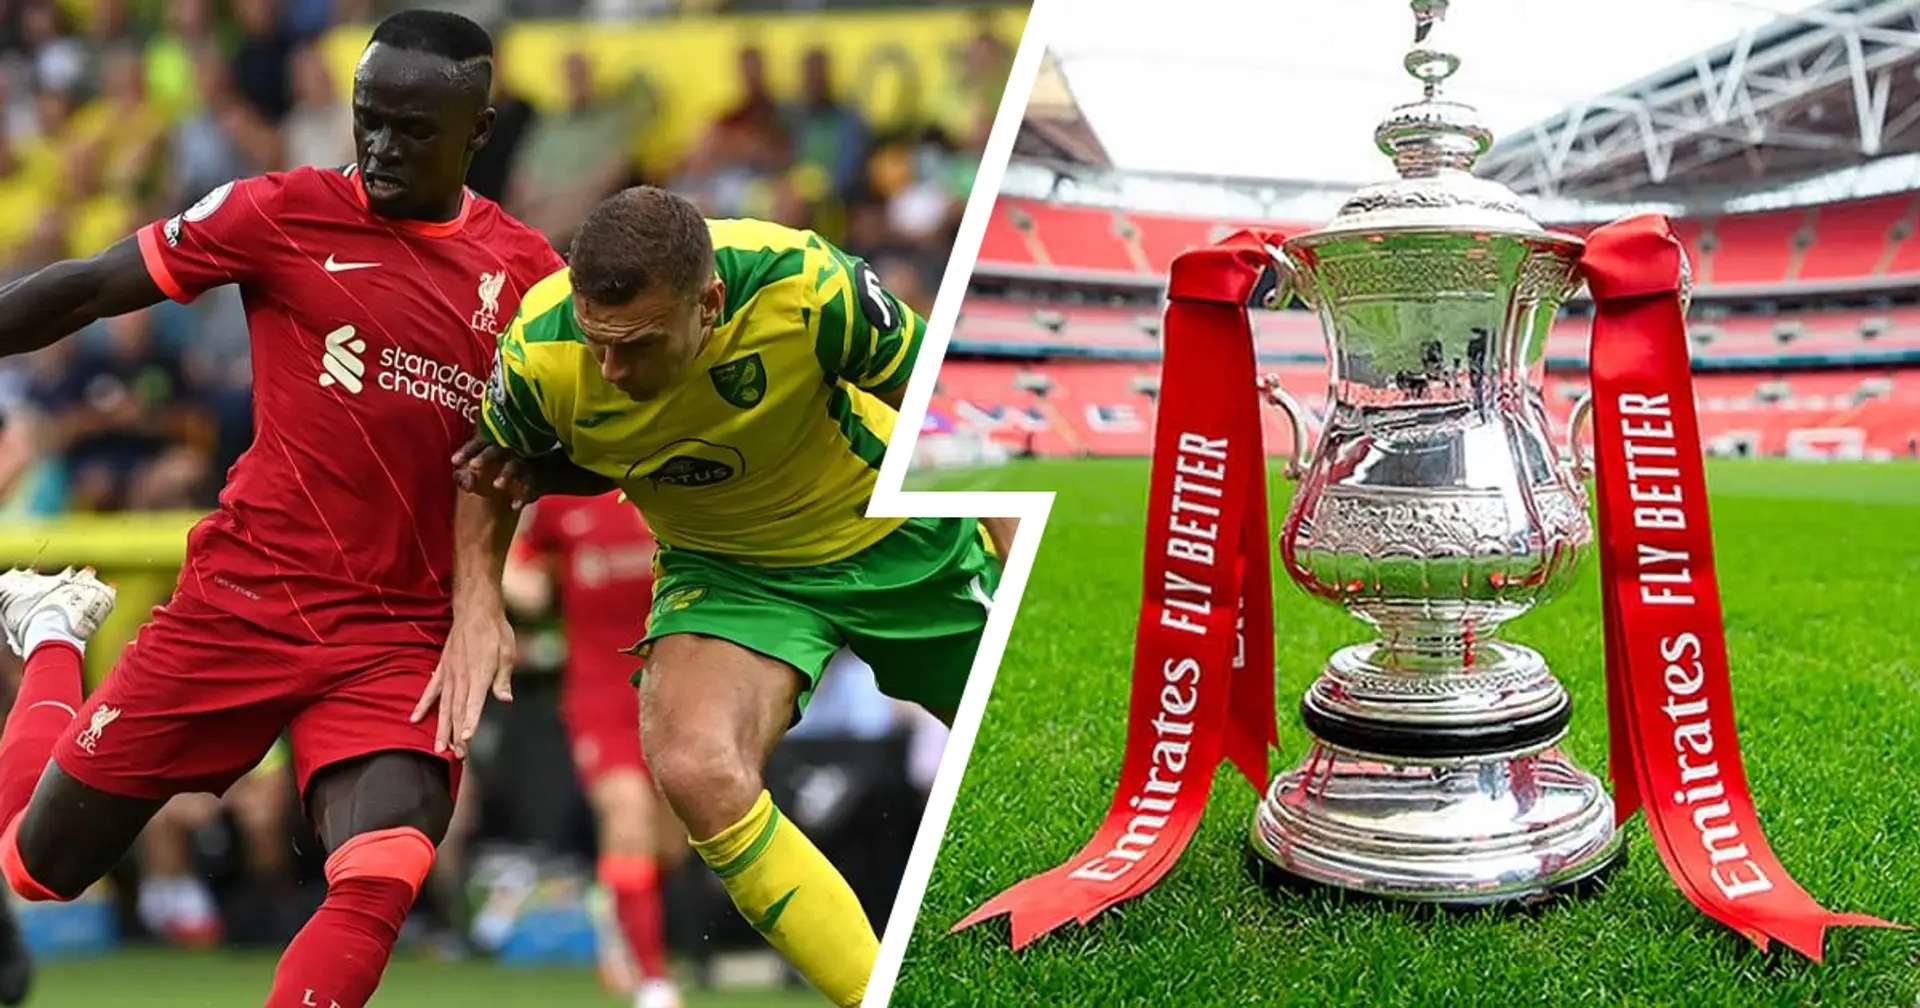 OFFICIAL: Liverpool to face Norwich in FA Cup 5th round